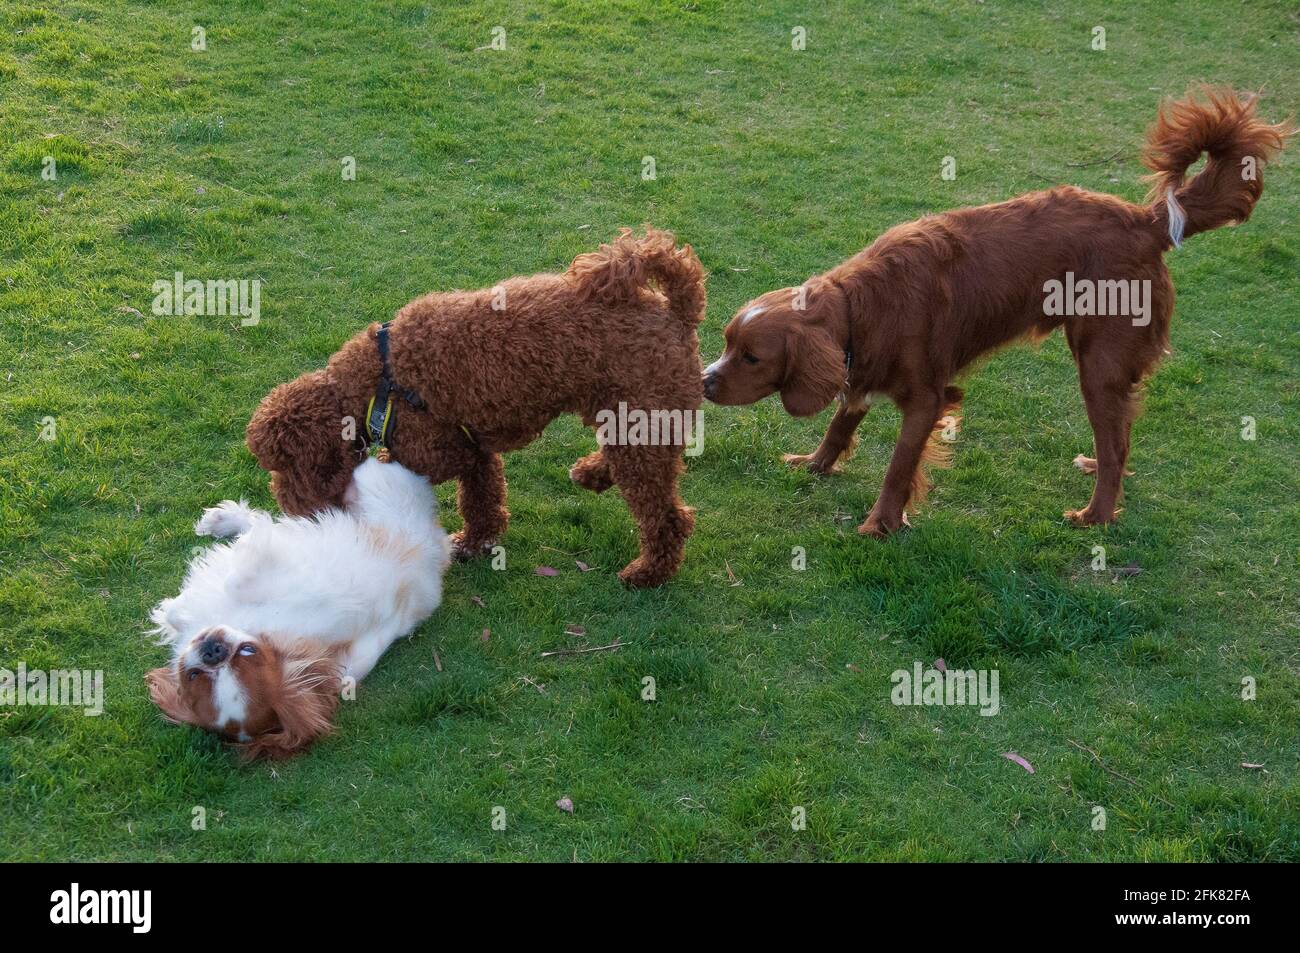 Three dogs of different breeds - King Charles Spaniel, Labradoodle and Nova Scotia Duck Tolling Retriever -  socialising in a public park Stock Photo